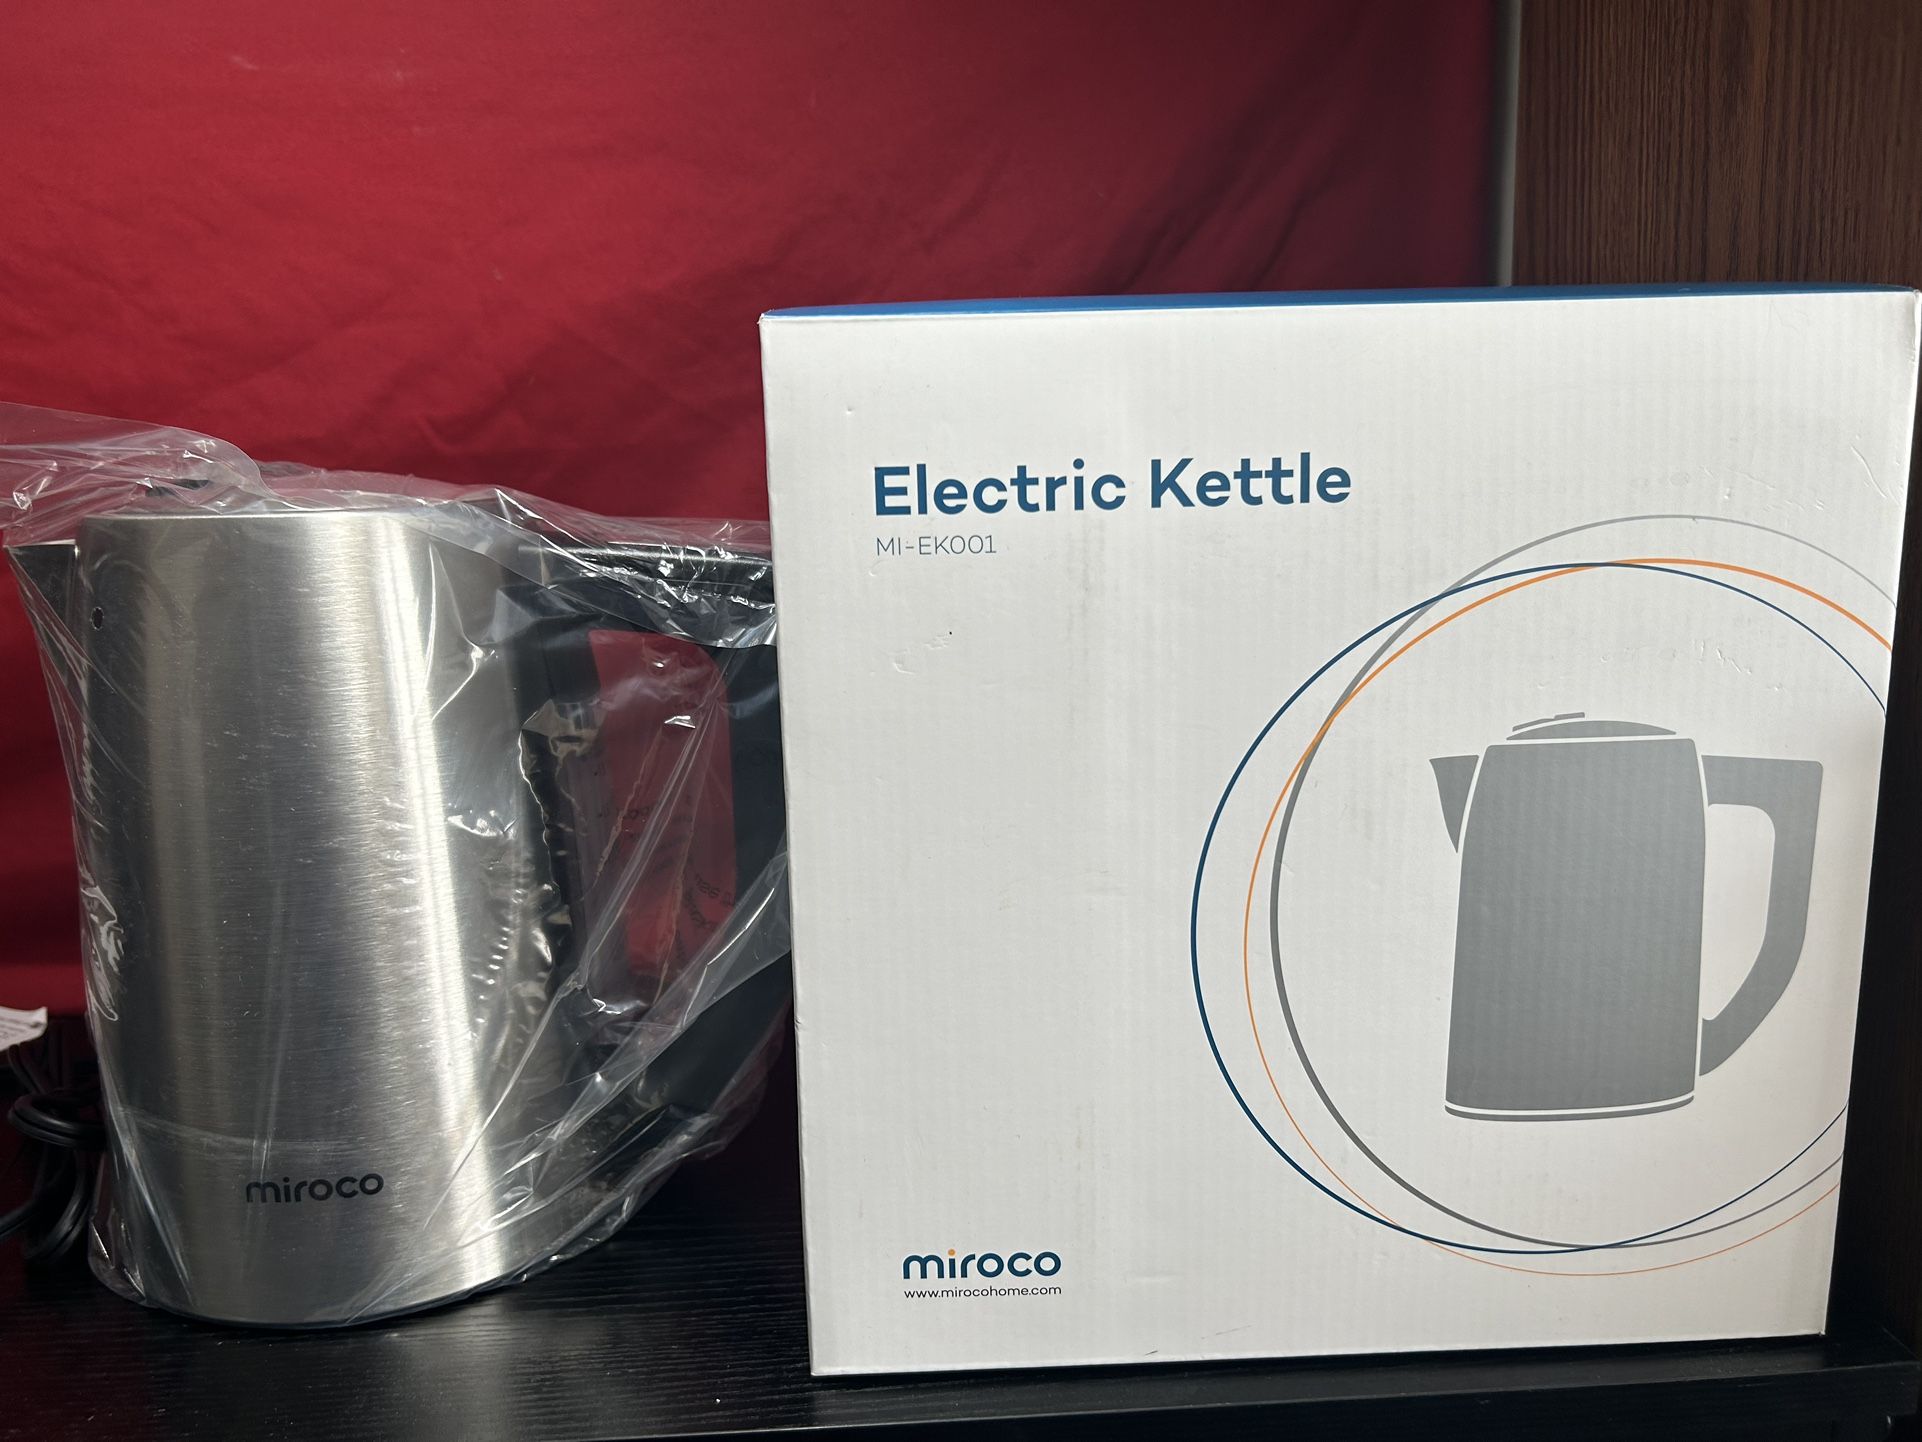 Miroco Electric Tea Kettle Model MI-EK001 Stainless Steel 1.7 Liter New  All proceeds go towards my cancer treatment and recovery. Thank you and god b